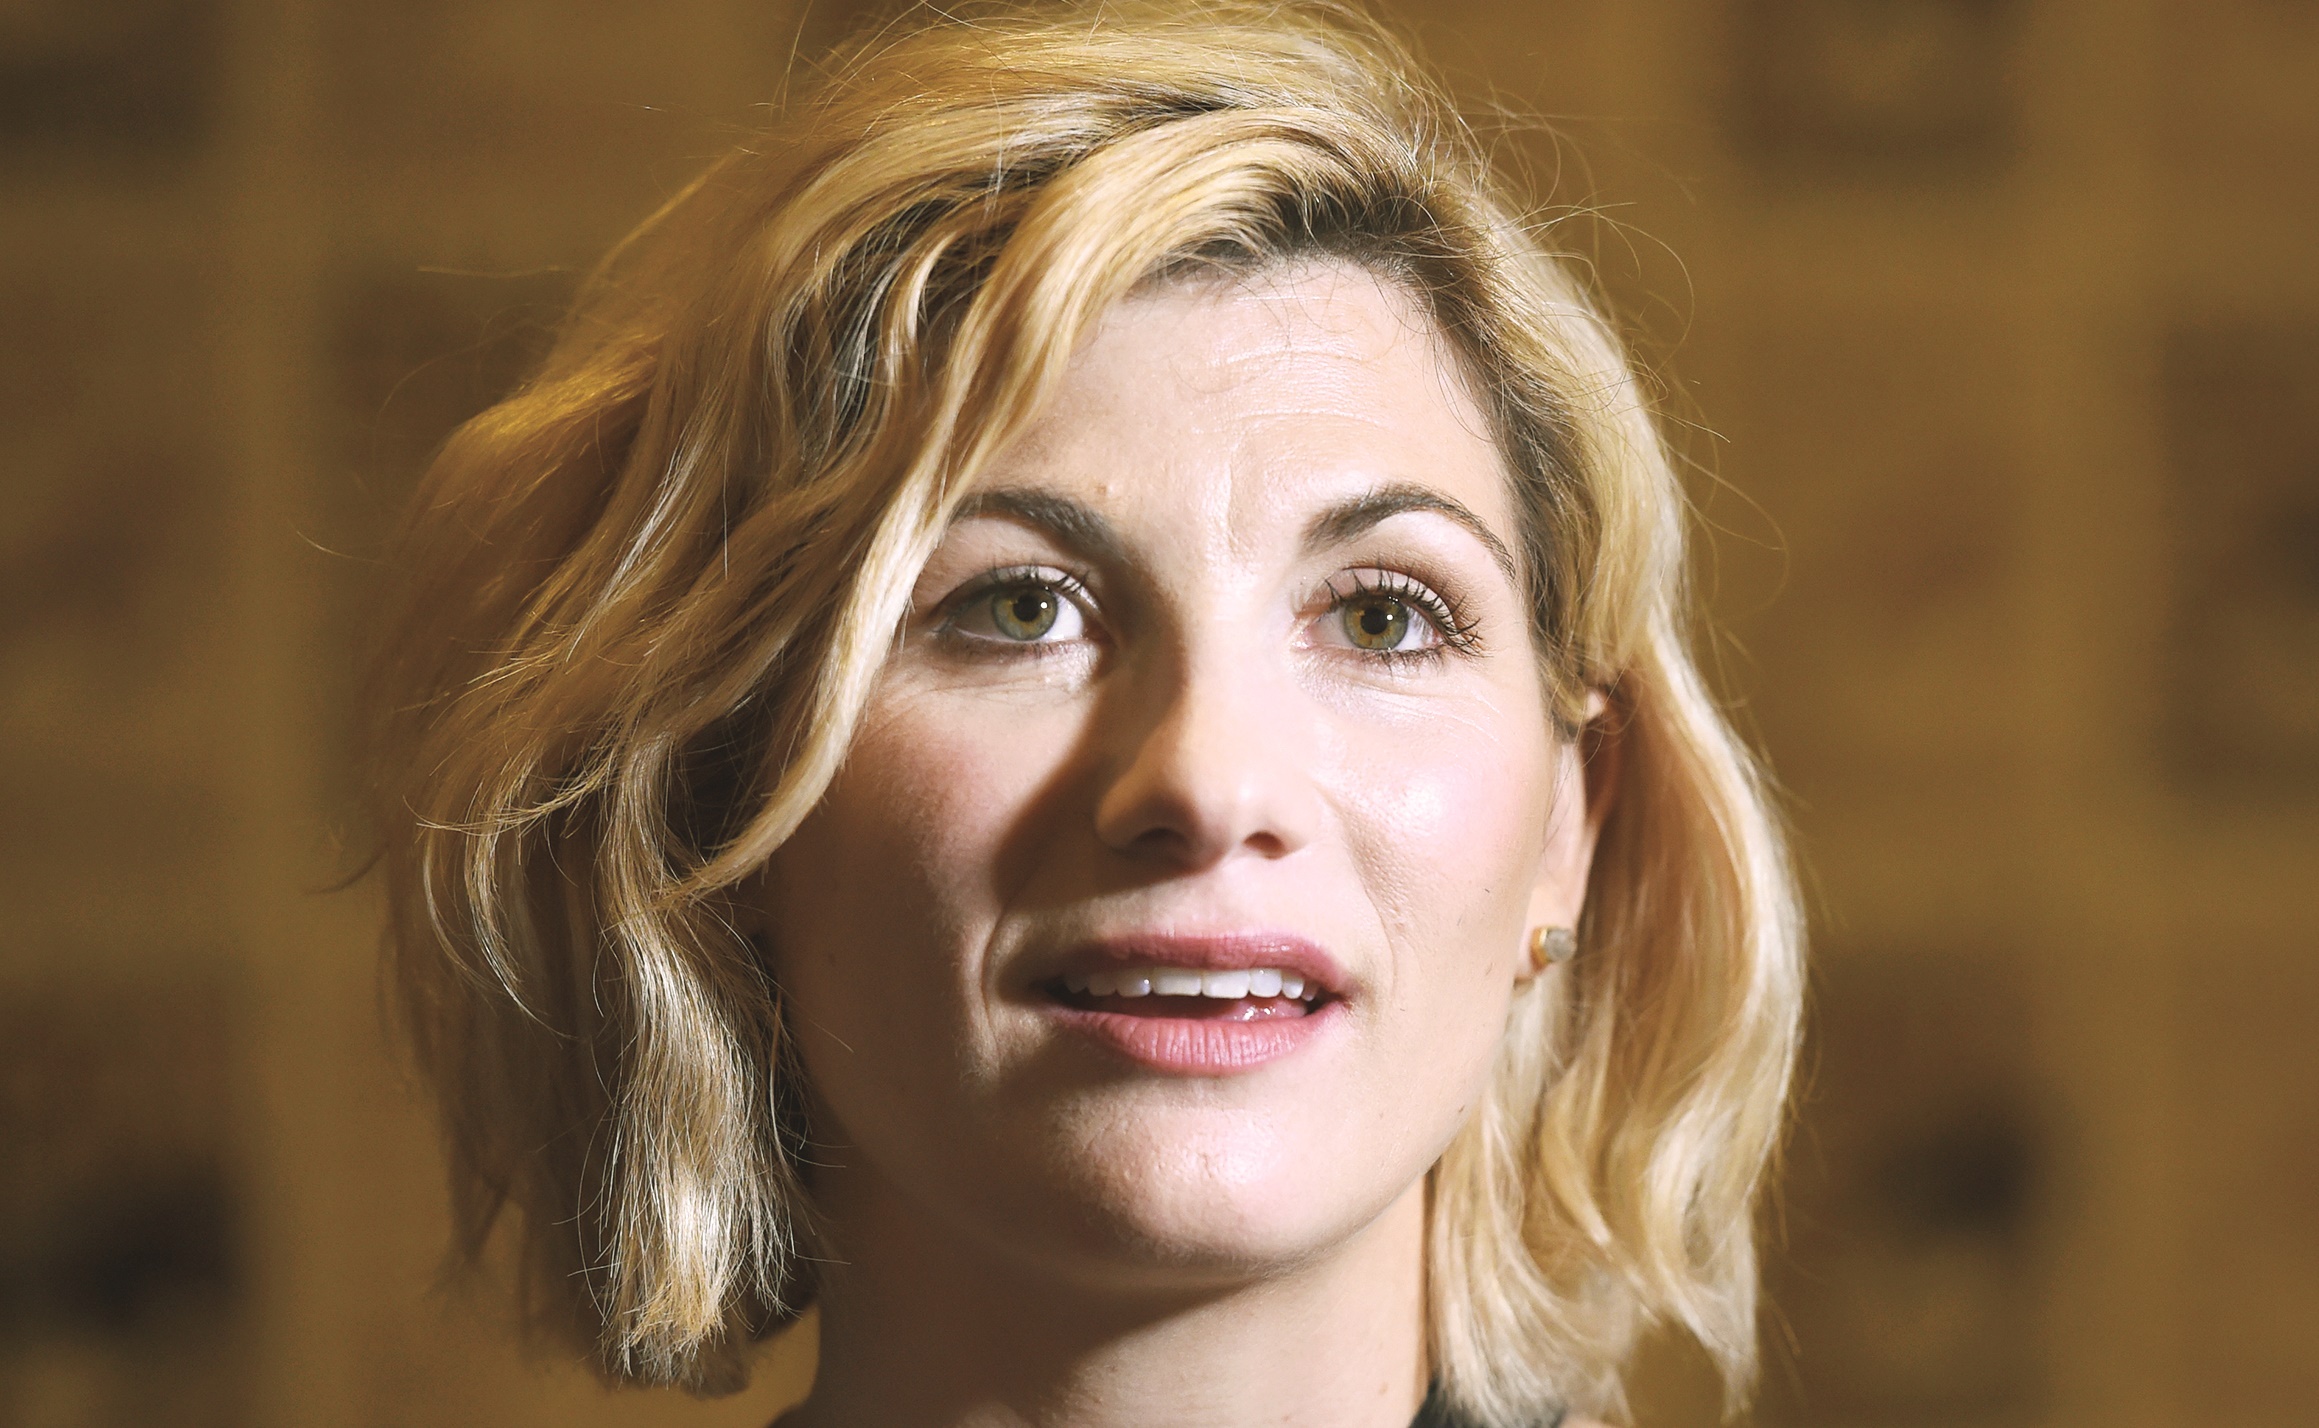 Inevitable que una mujer fuera Dr. Who: Jodie Whittaker